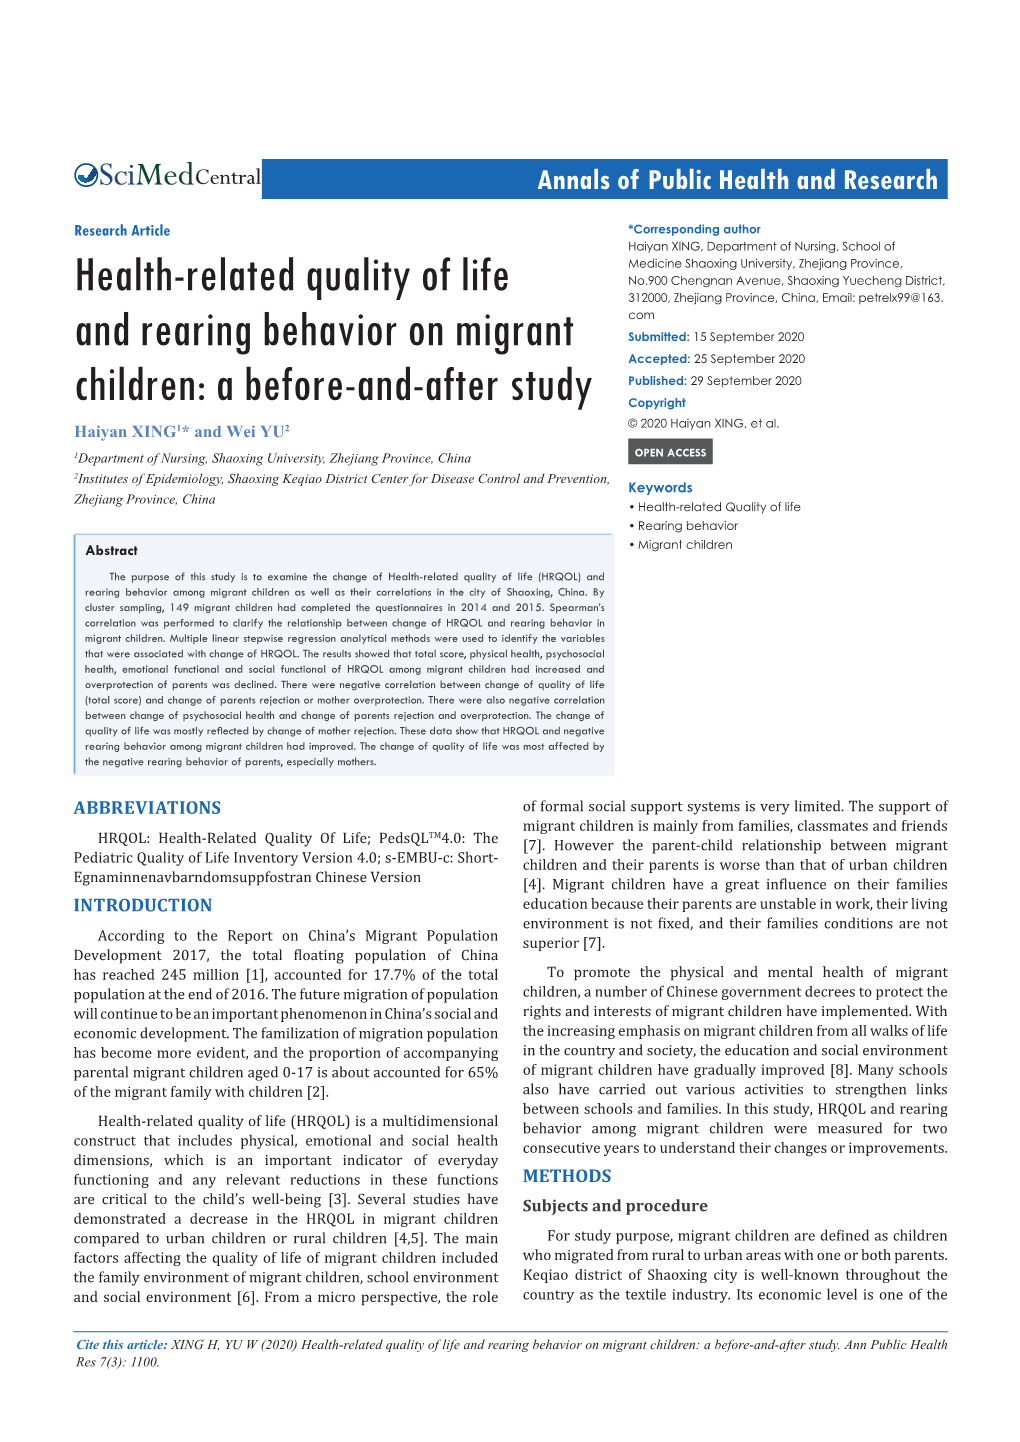 Health-Related Quality of Life and Rearing Behavior on Migrant Children: a Before-And-After Study